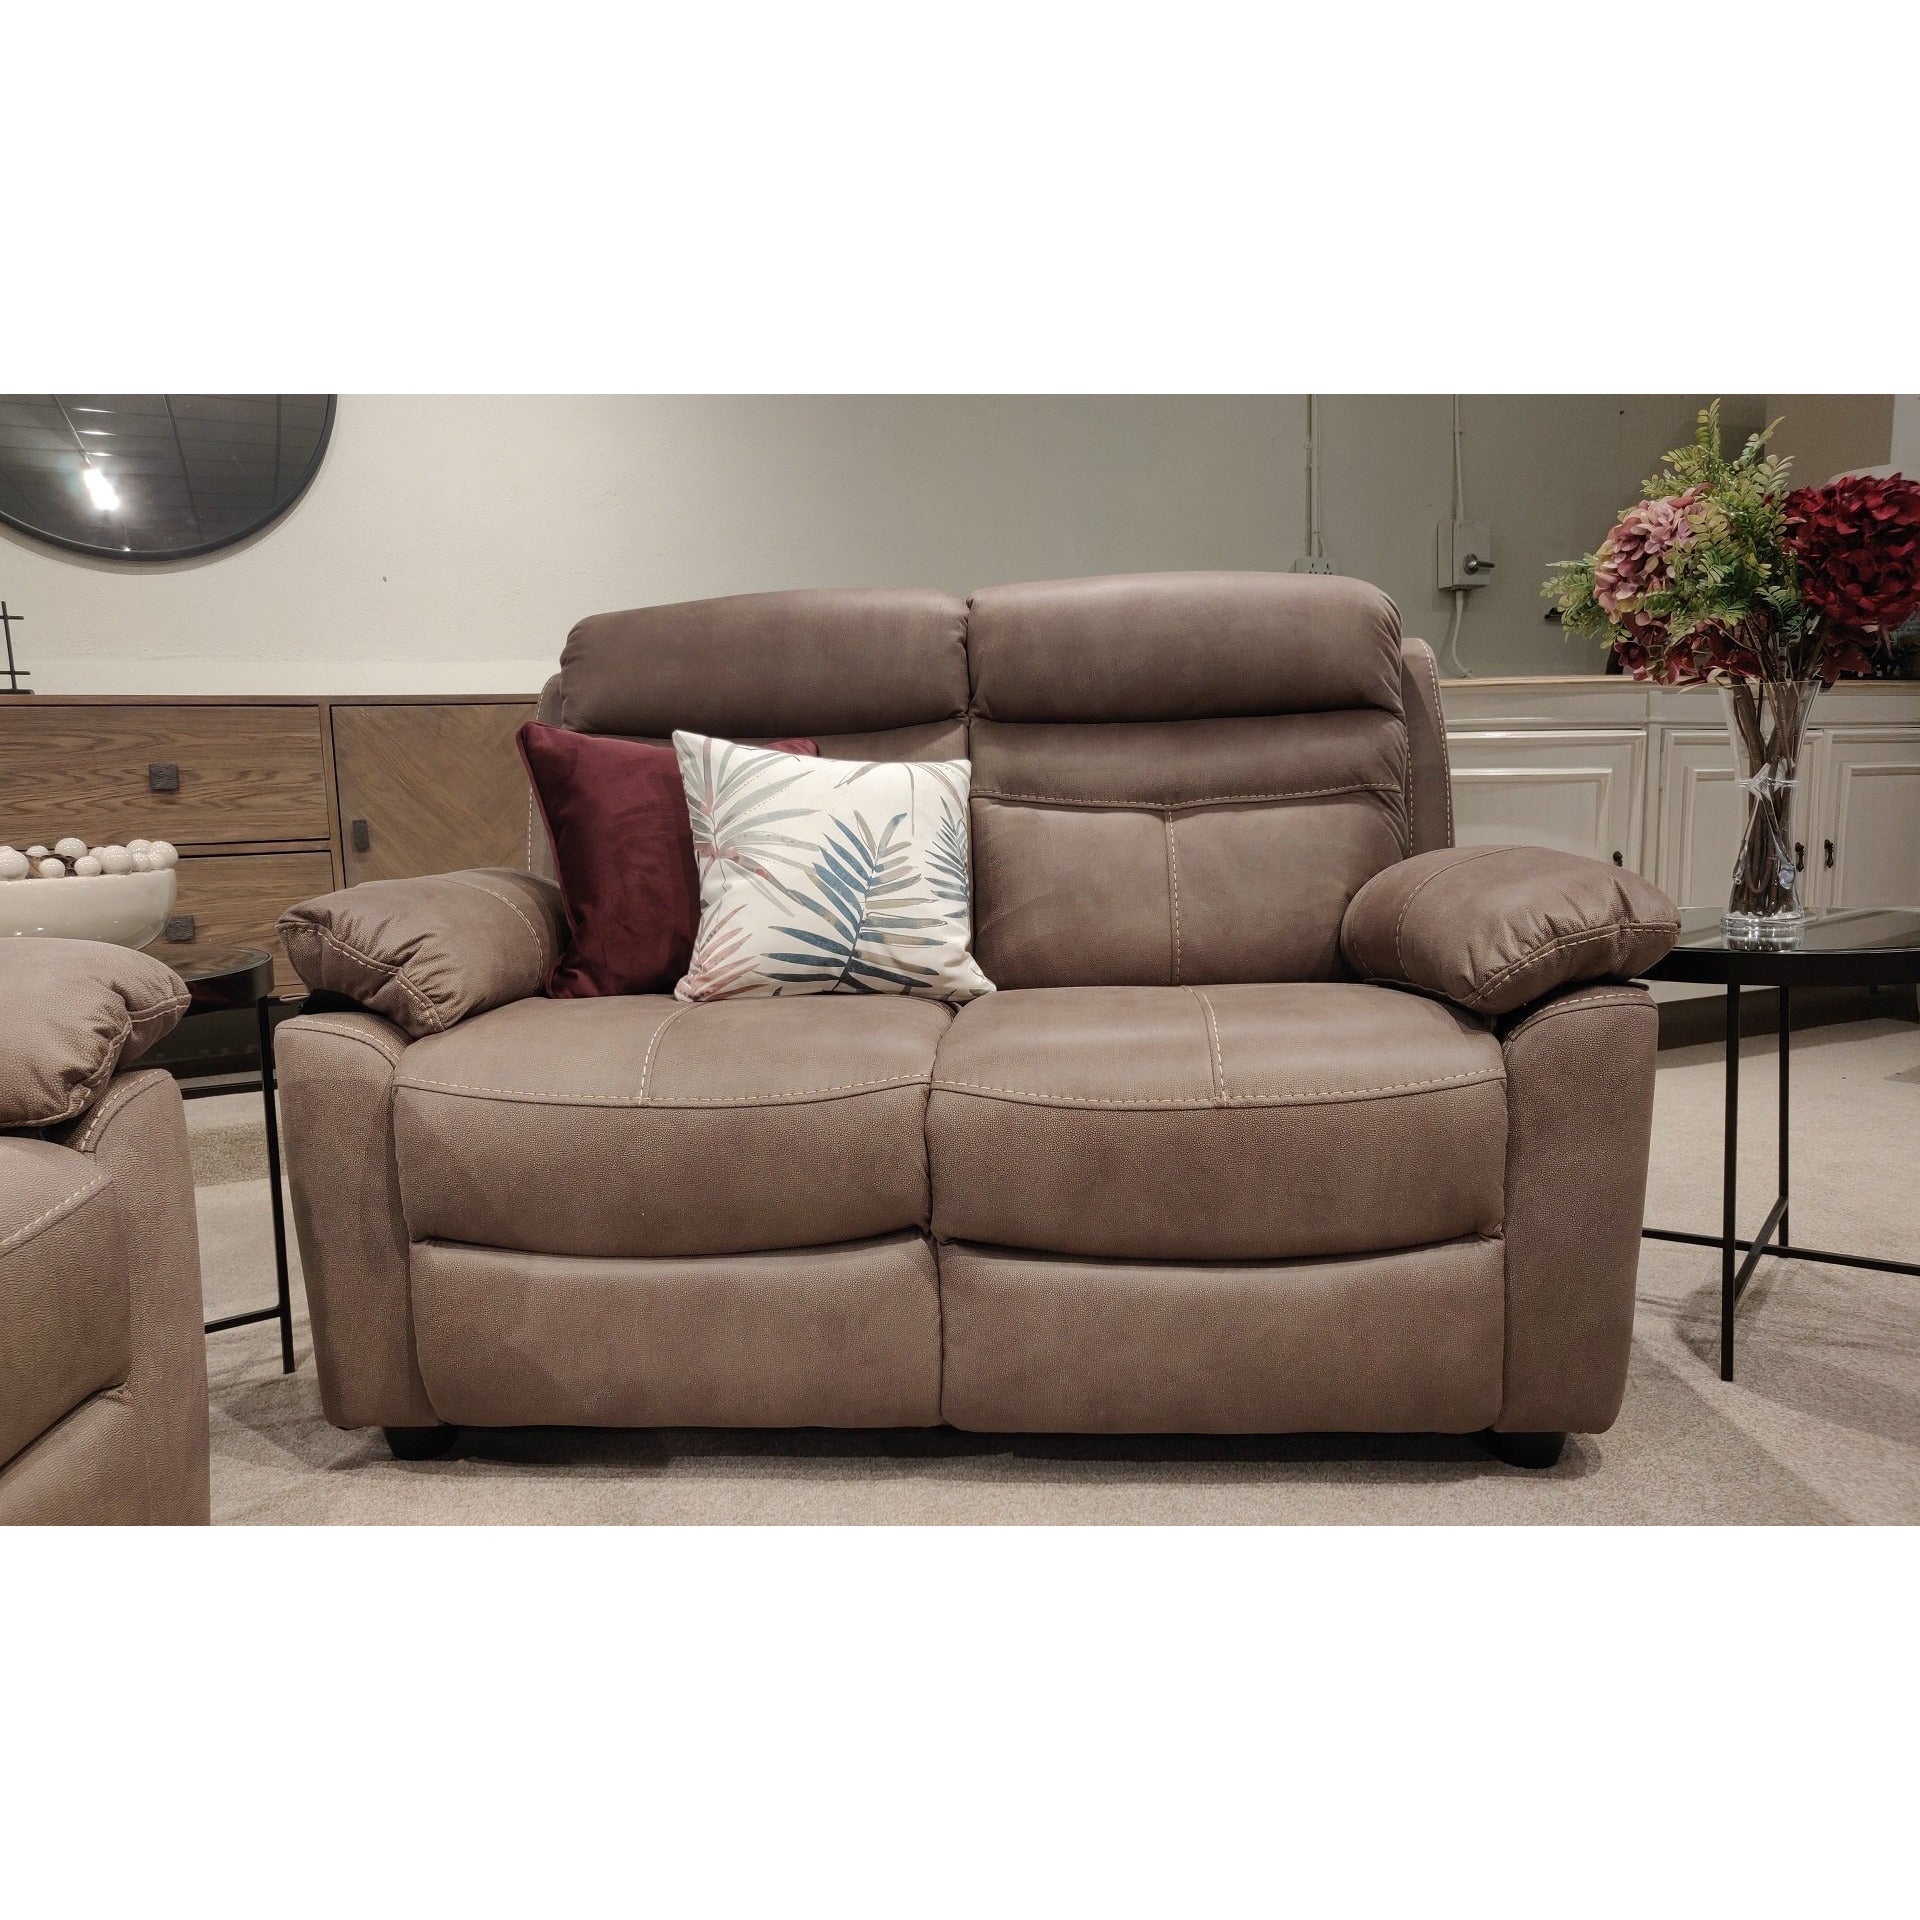 Lucy 2 Seater Recliner Pecan from Upstairs Downstairs Furniture in Lisburn, Monaghan and Enniskillen